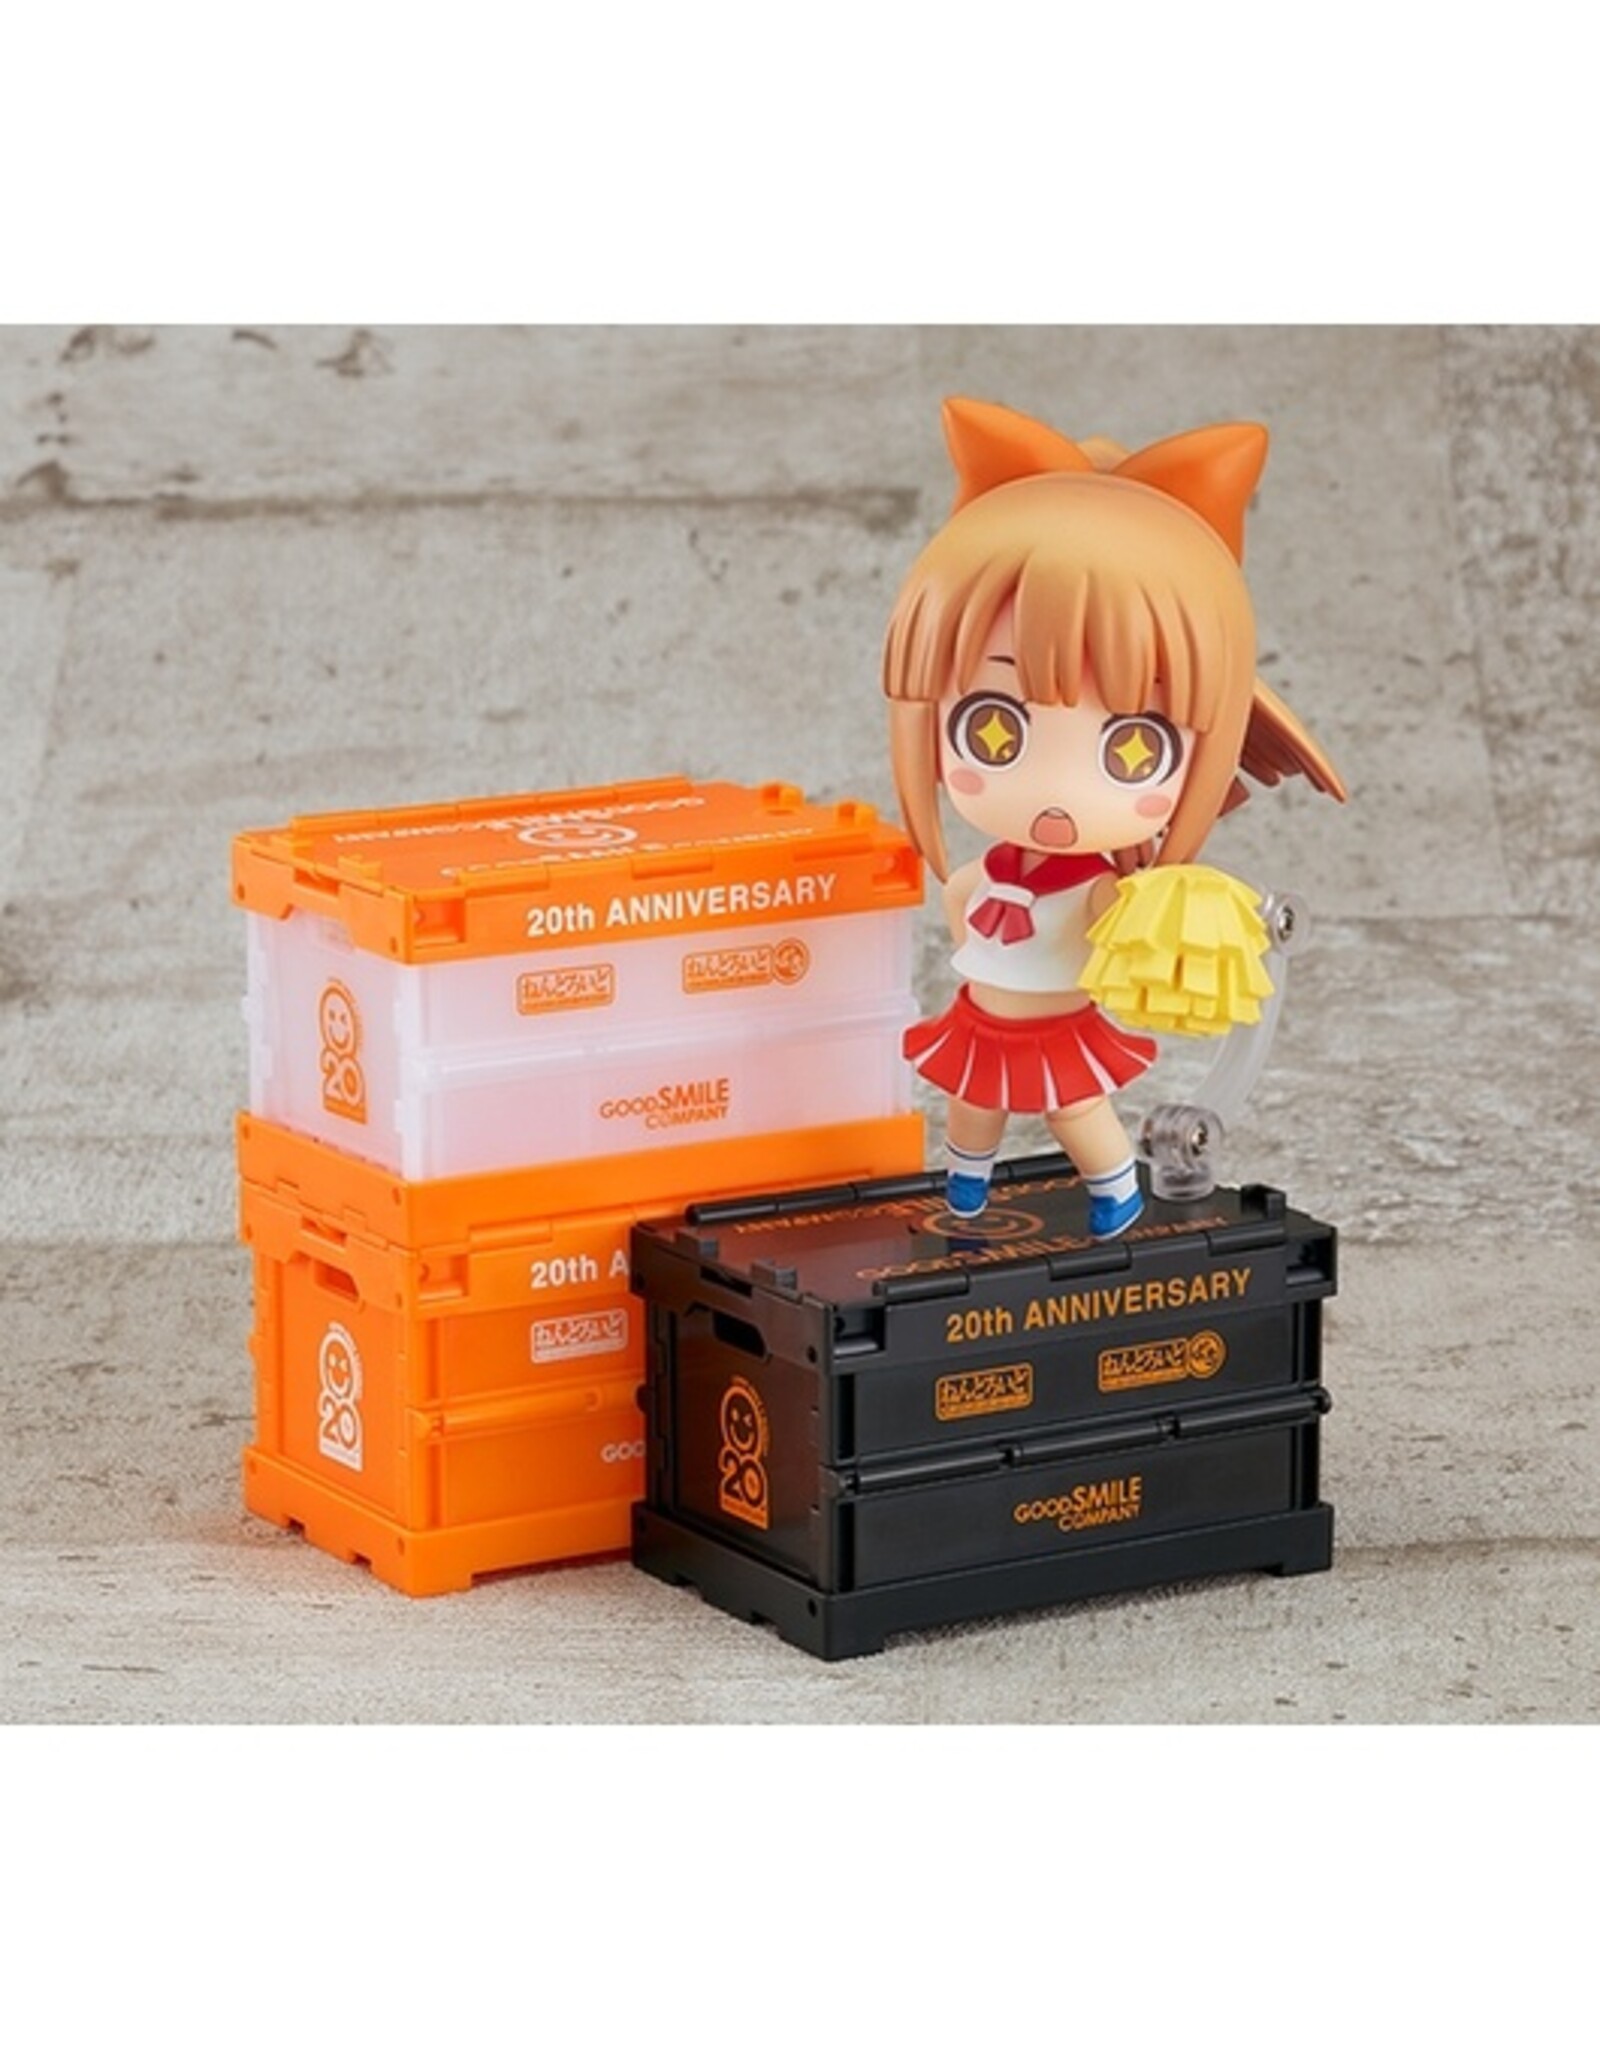 Goodsmile Nendoroid More Anniversary Container- Clear